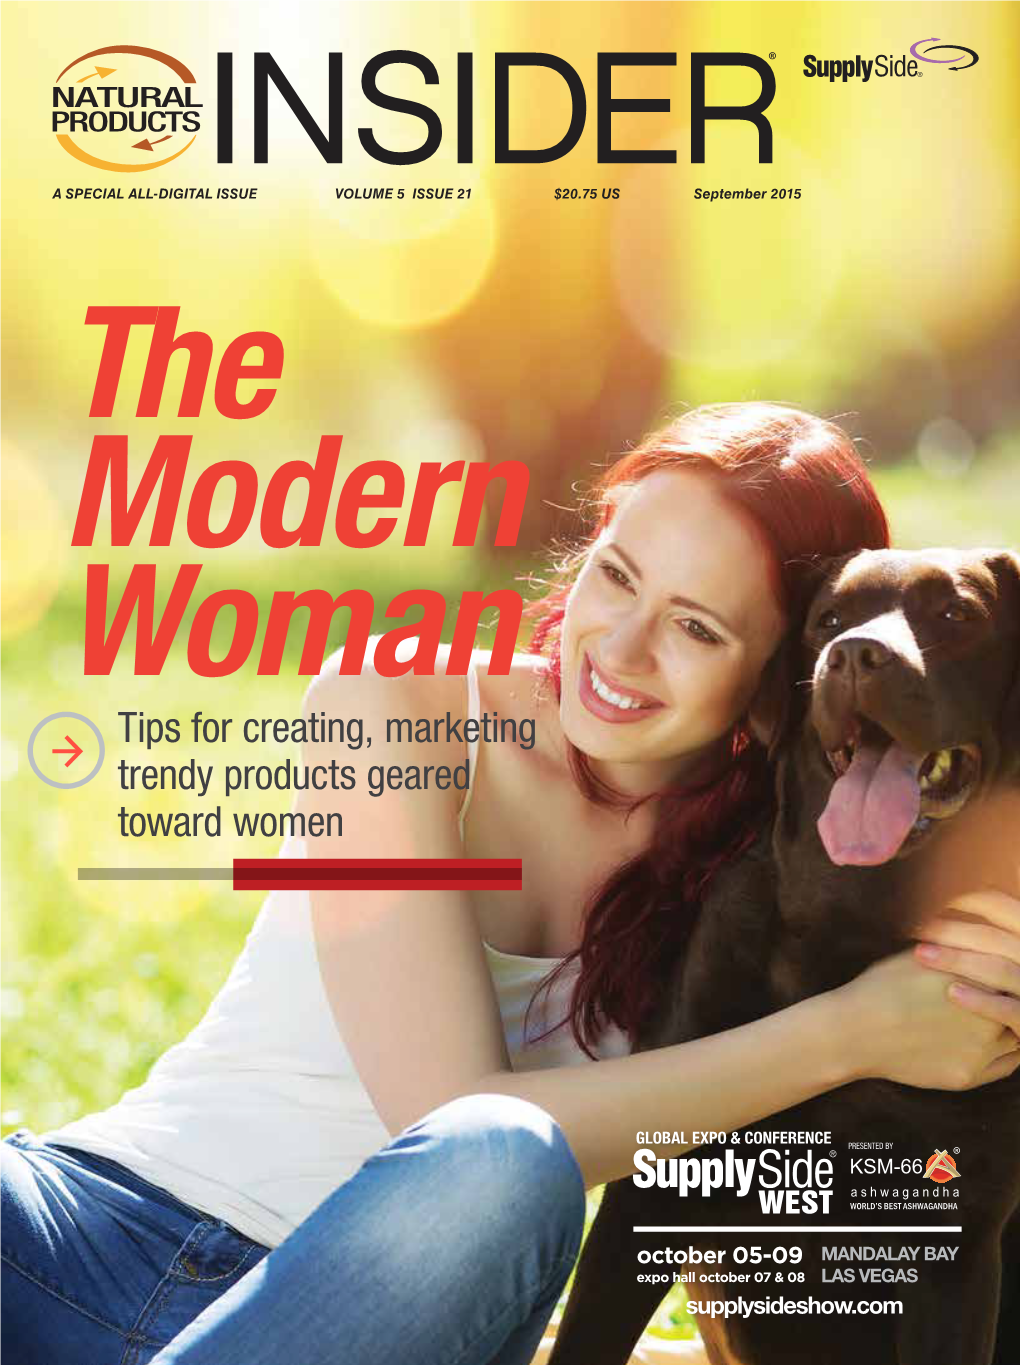 The Modern Woman Tips for Creating, Marketing Trendy Products Geared Toward Women